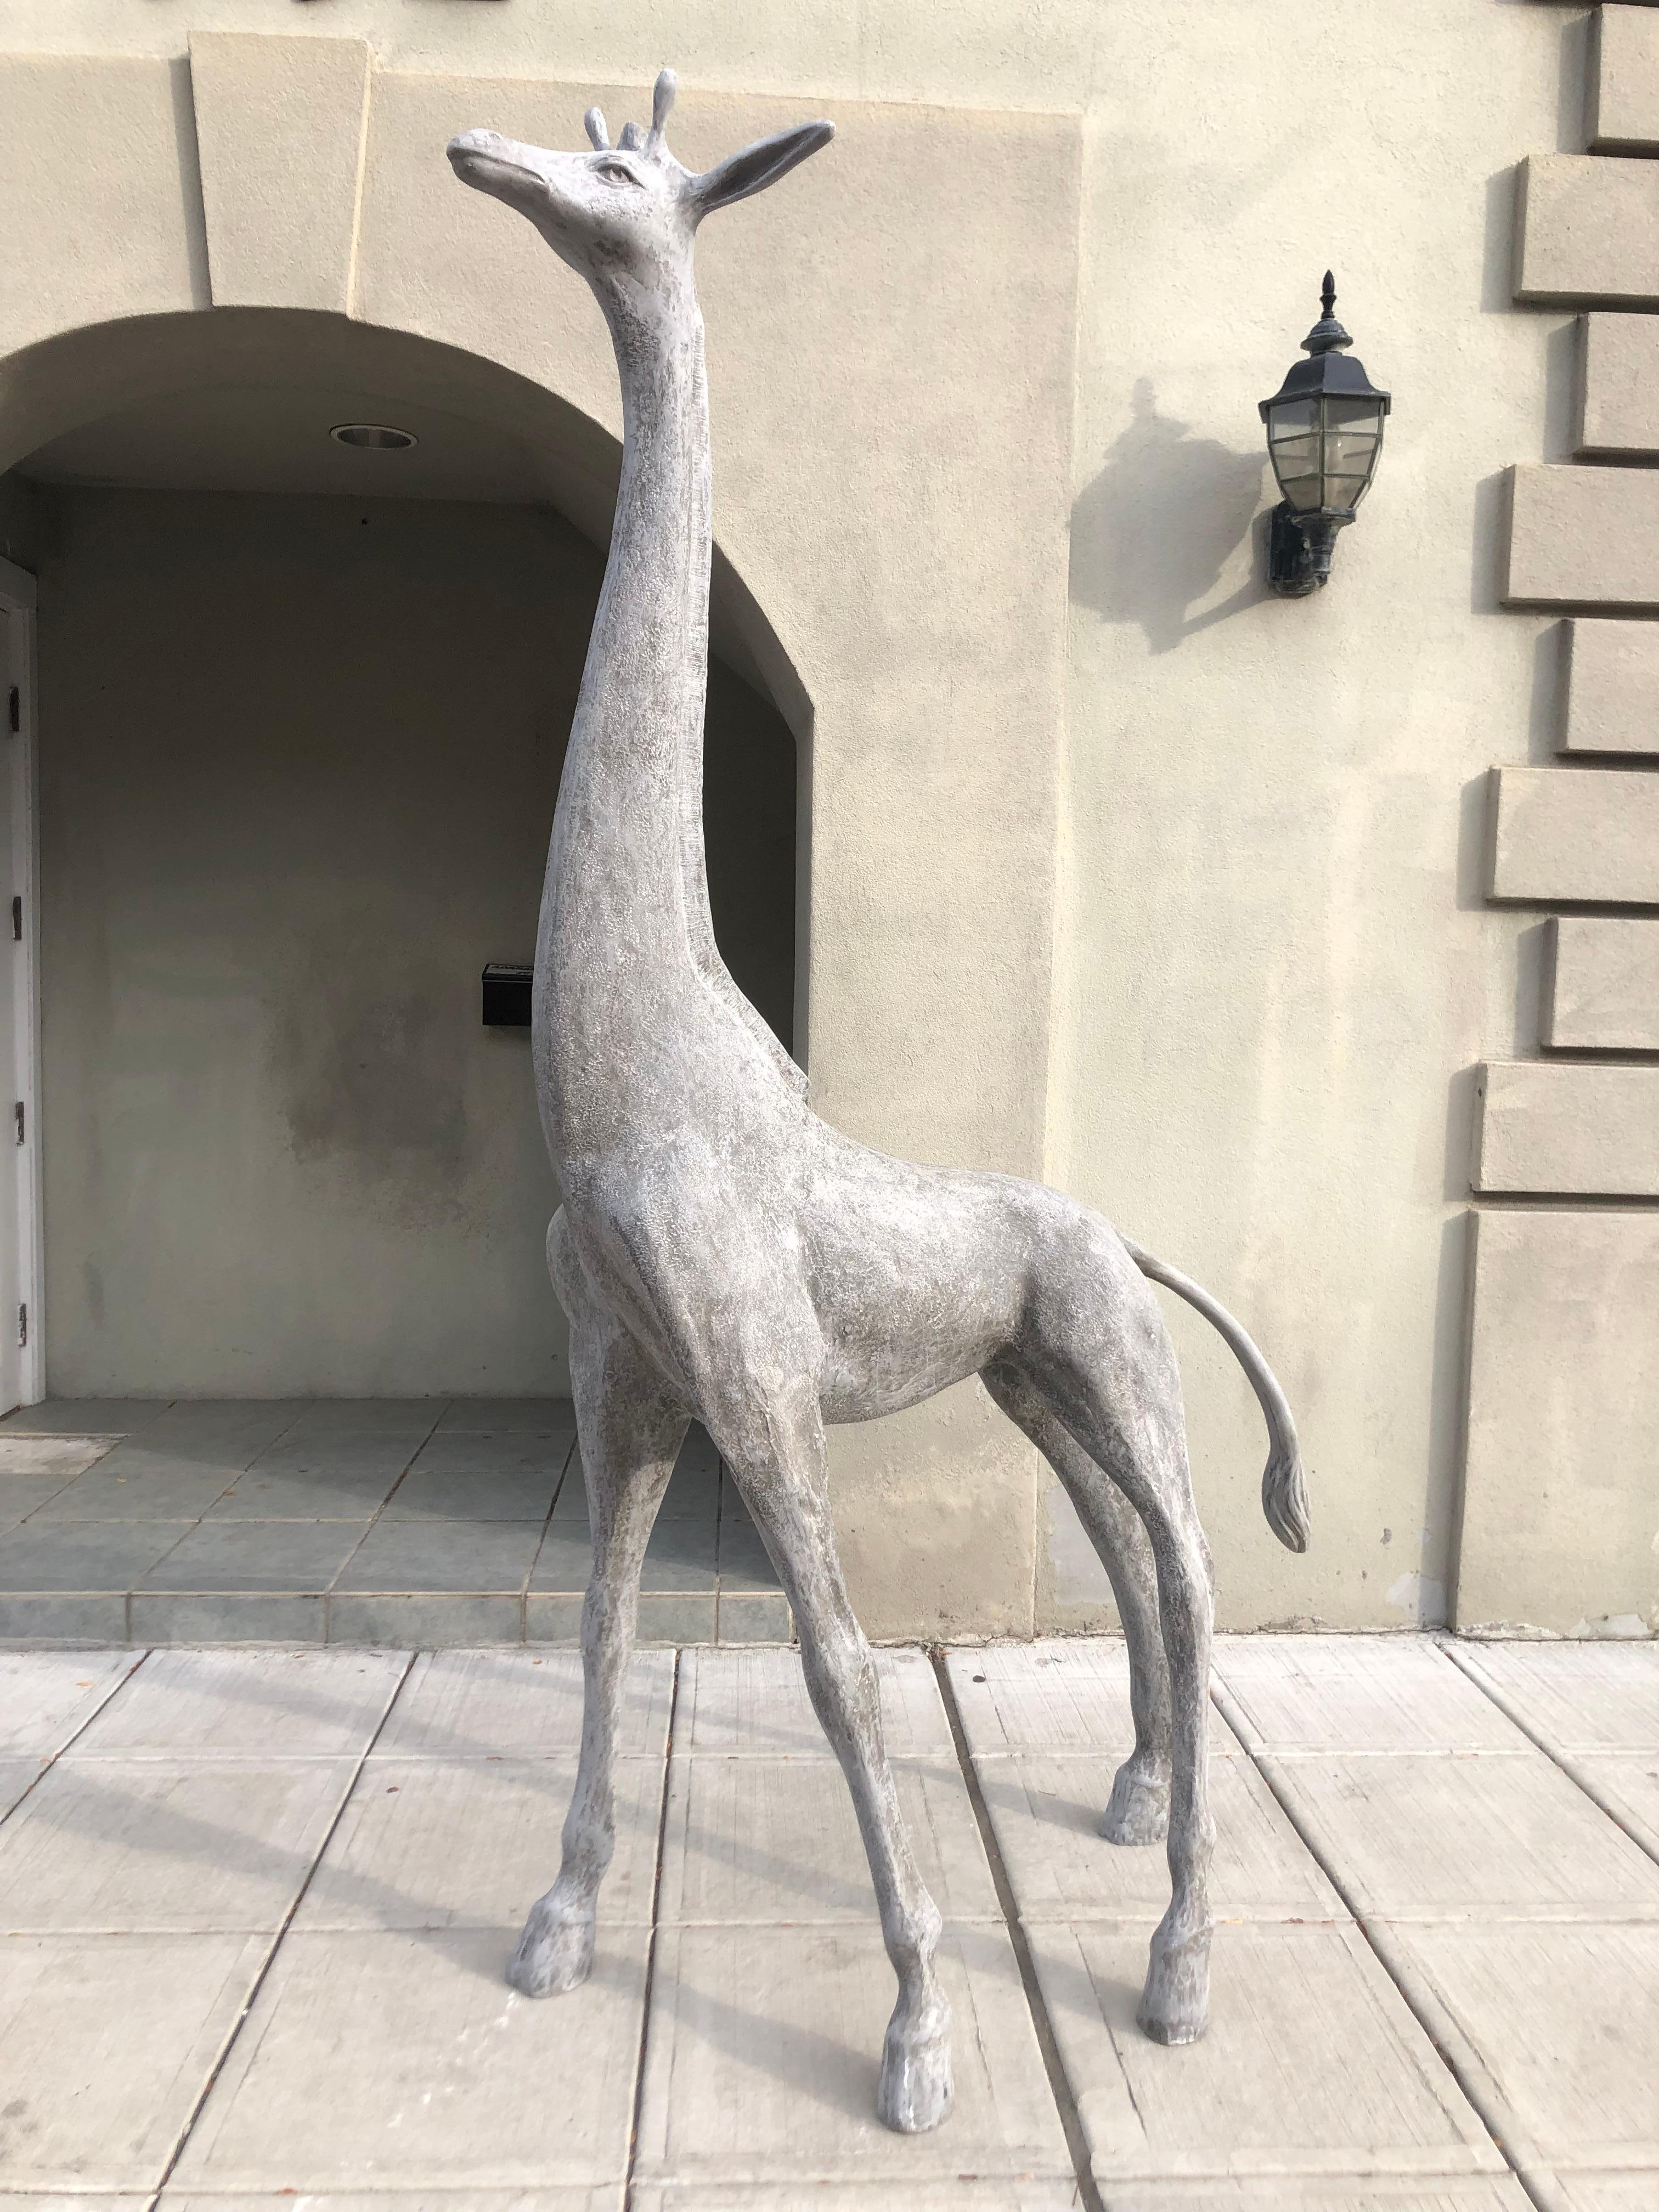 Fiberglass giraffe made of a very durable fiberglass which will withstand the elements. A fun piece to own which looks great in a yard or garden. I have one standing in the garden for the last 15 years and I love it one of may favorite animals.